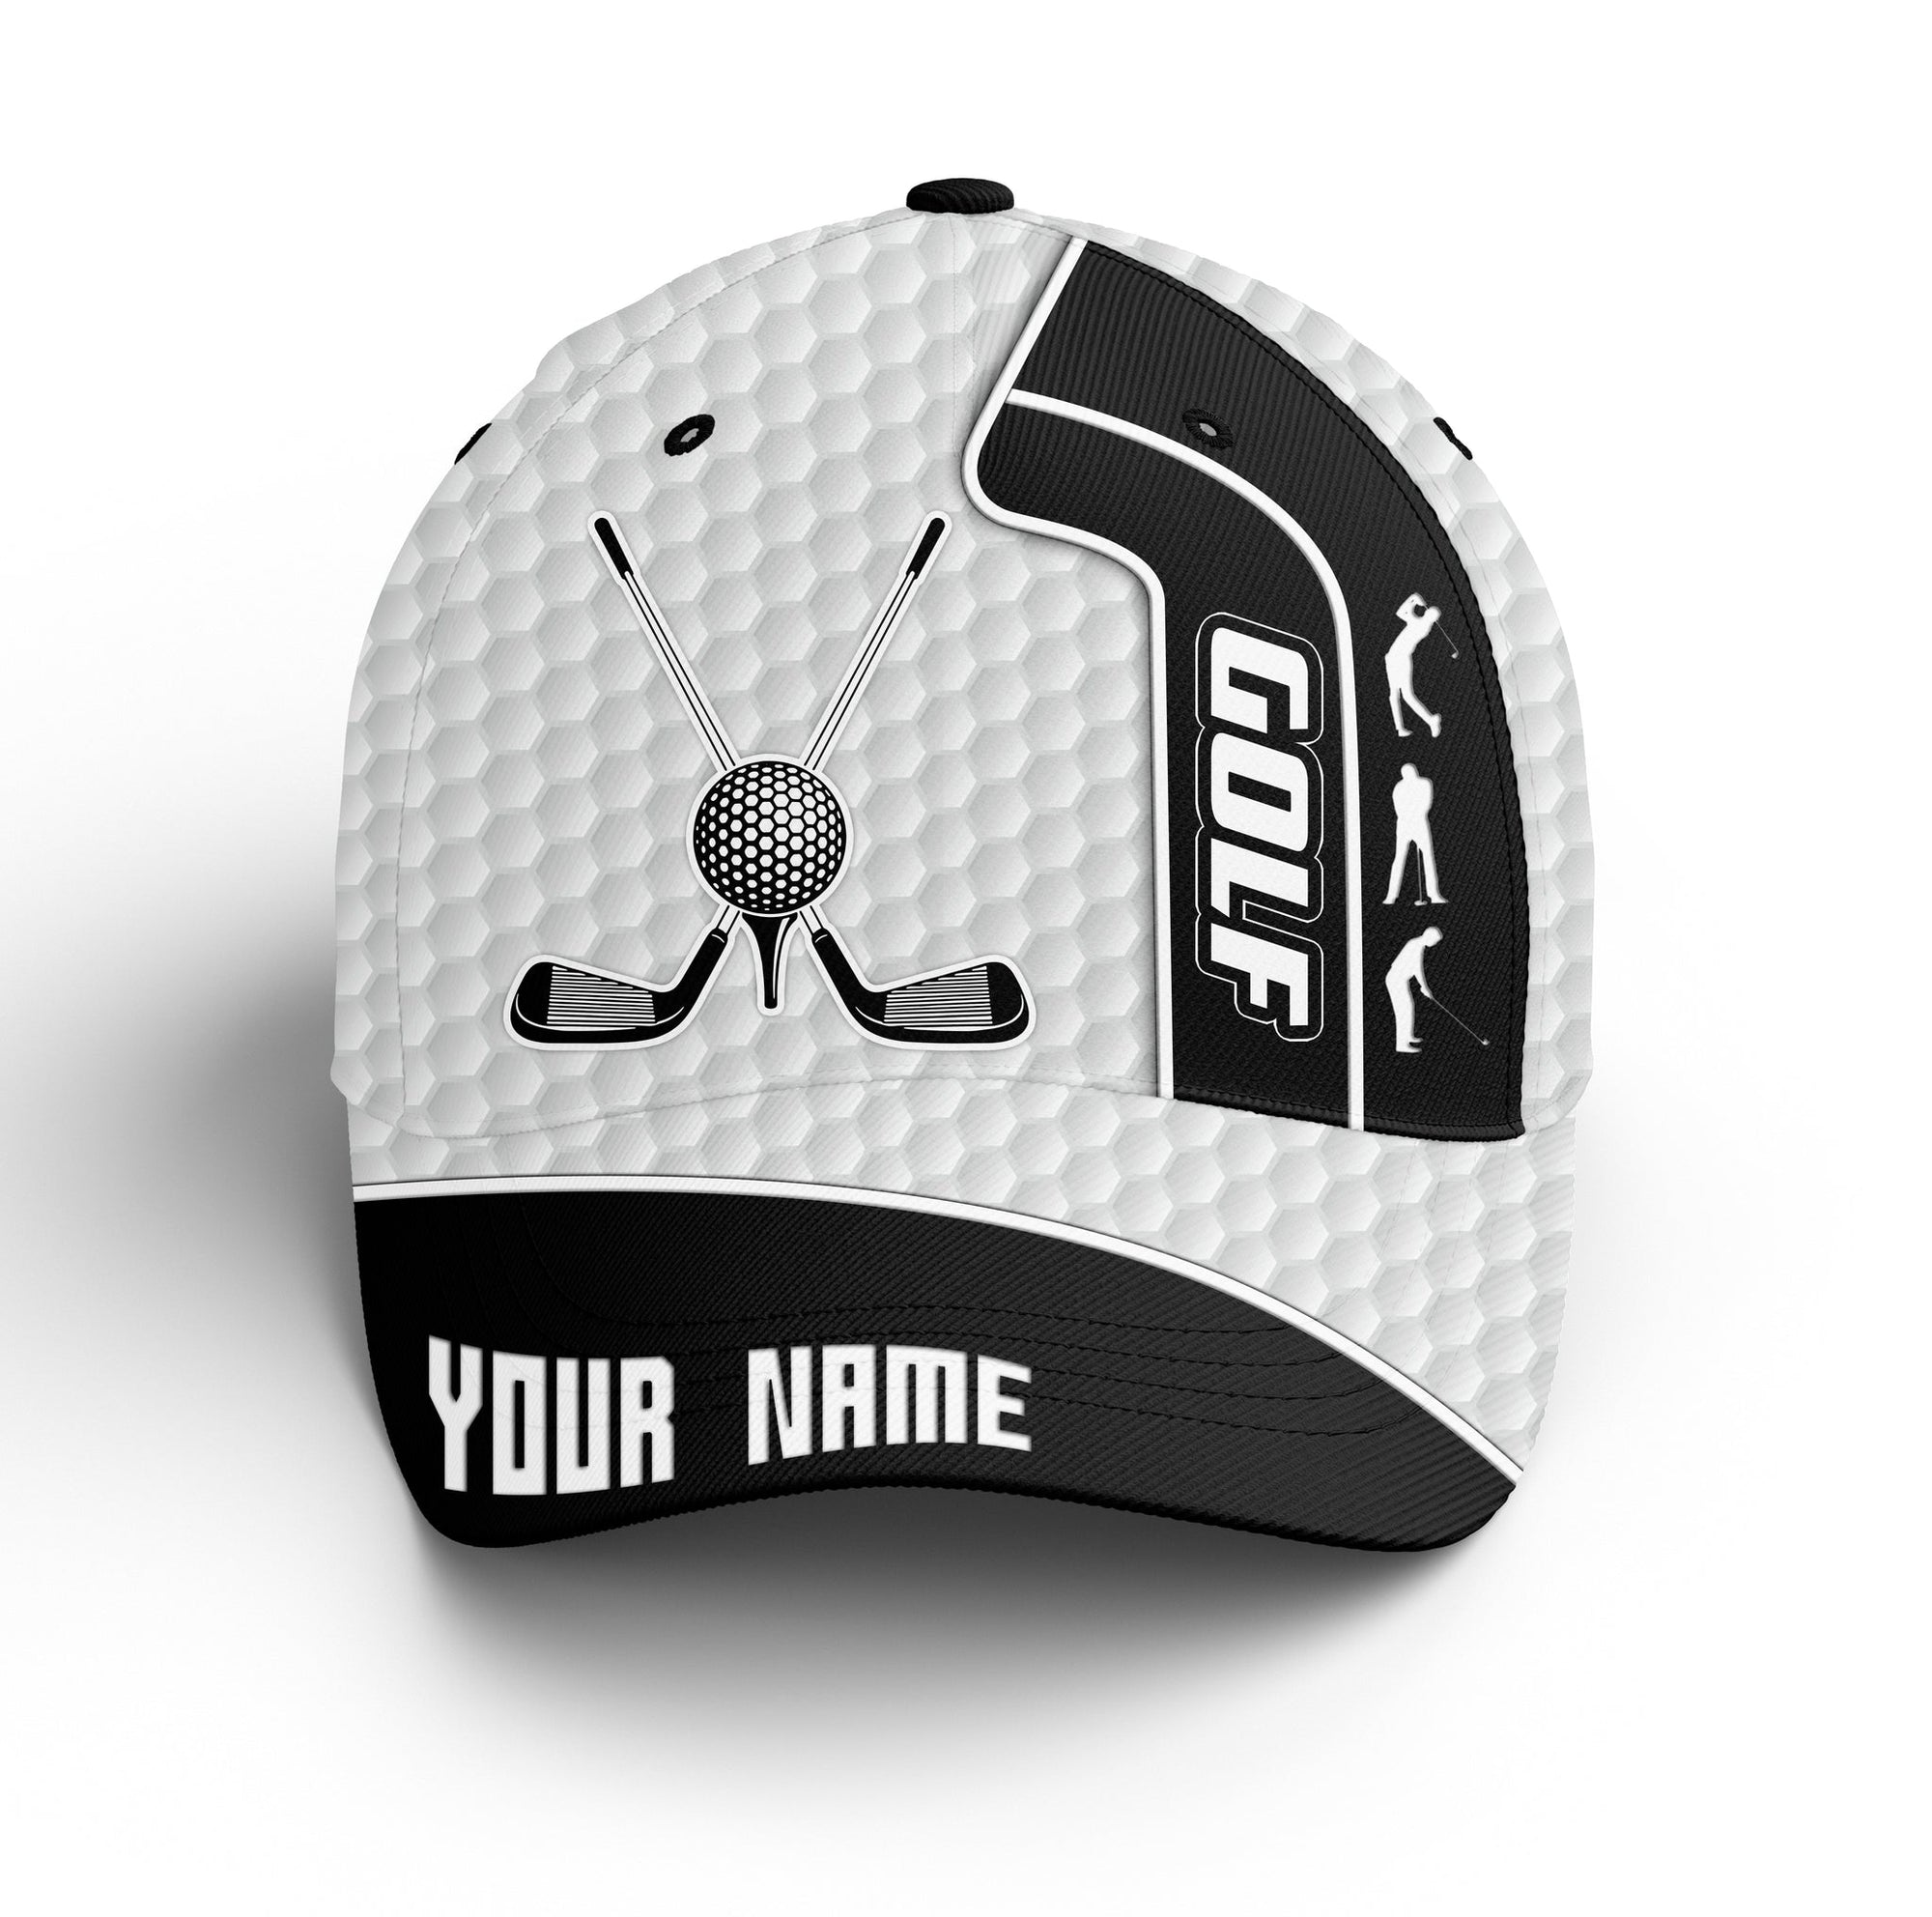 Golf Hat Custom Name For Women, Black And White Golf Cap For Golf Lover Gifts, Golf Black And White Hats Gifts for Her, Him, Golfer, Friend